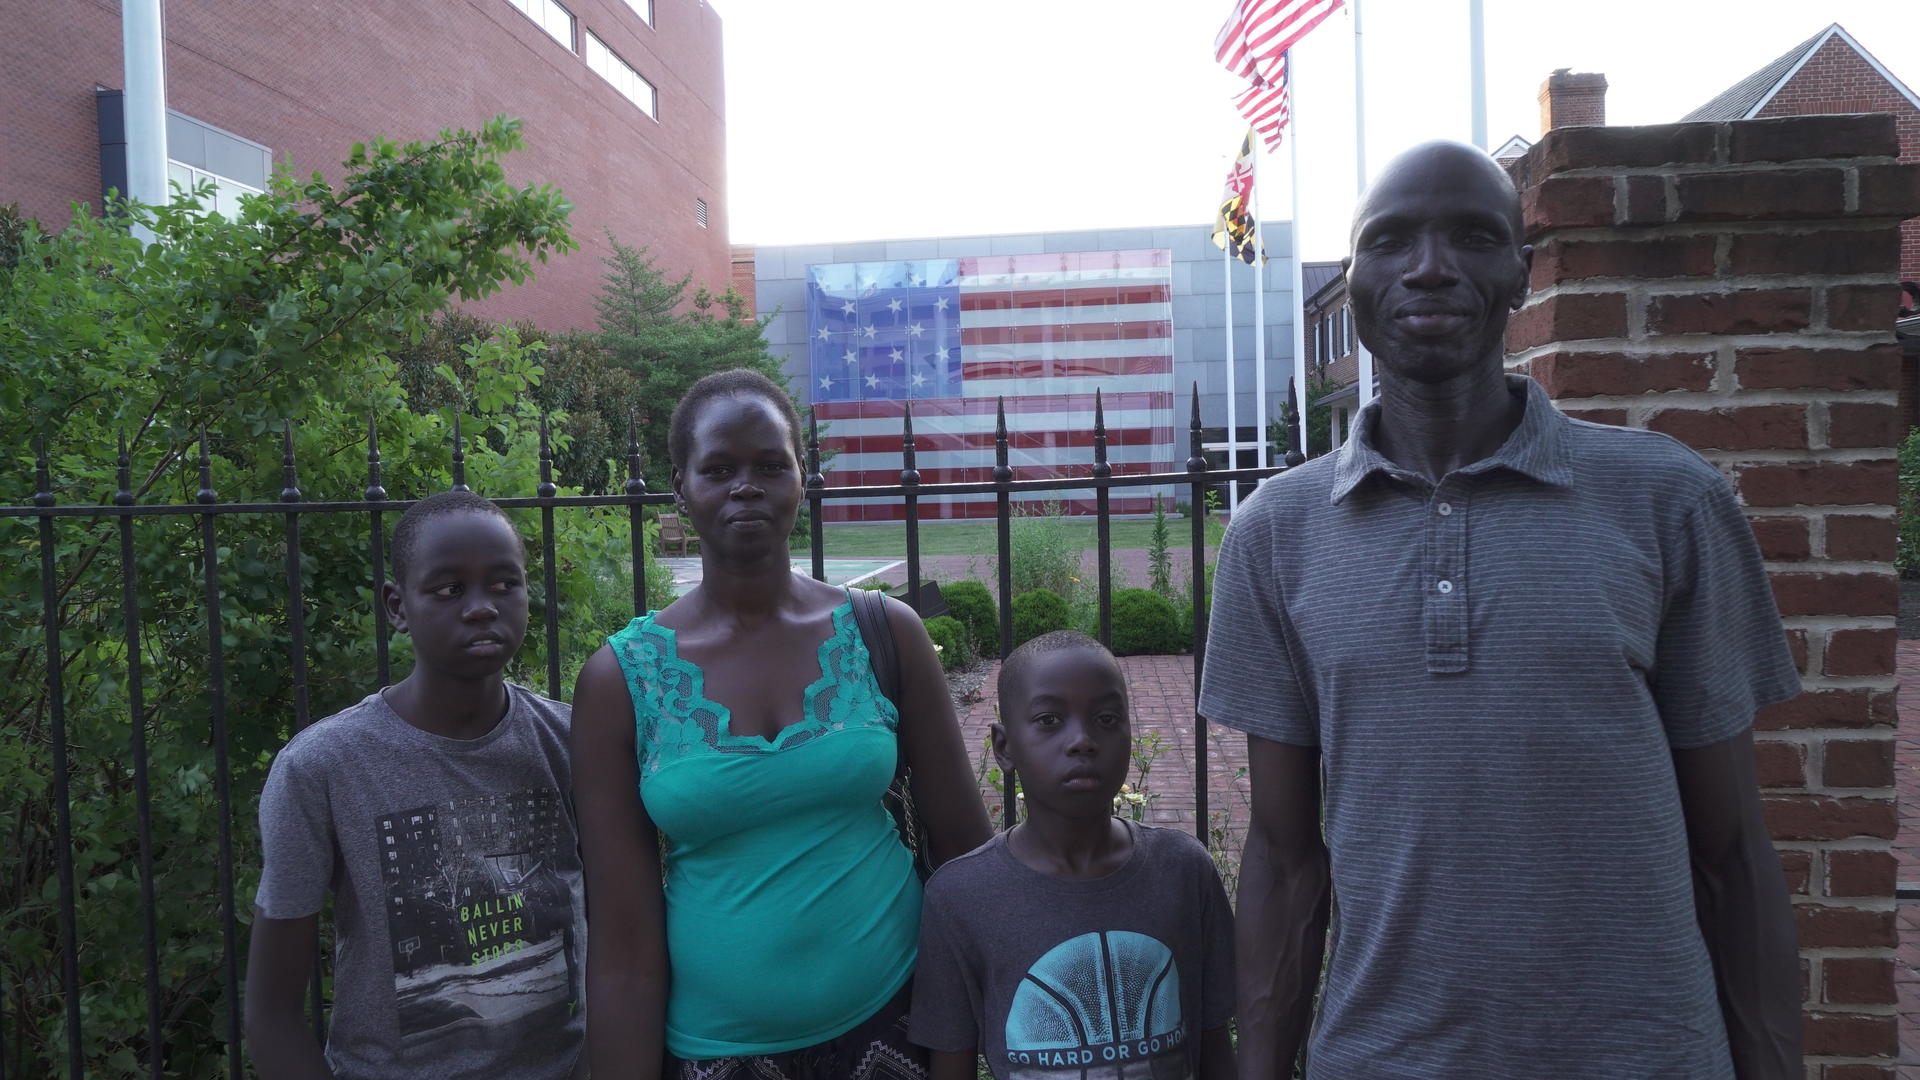 Timothy Cham and his family in Baltimore